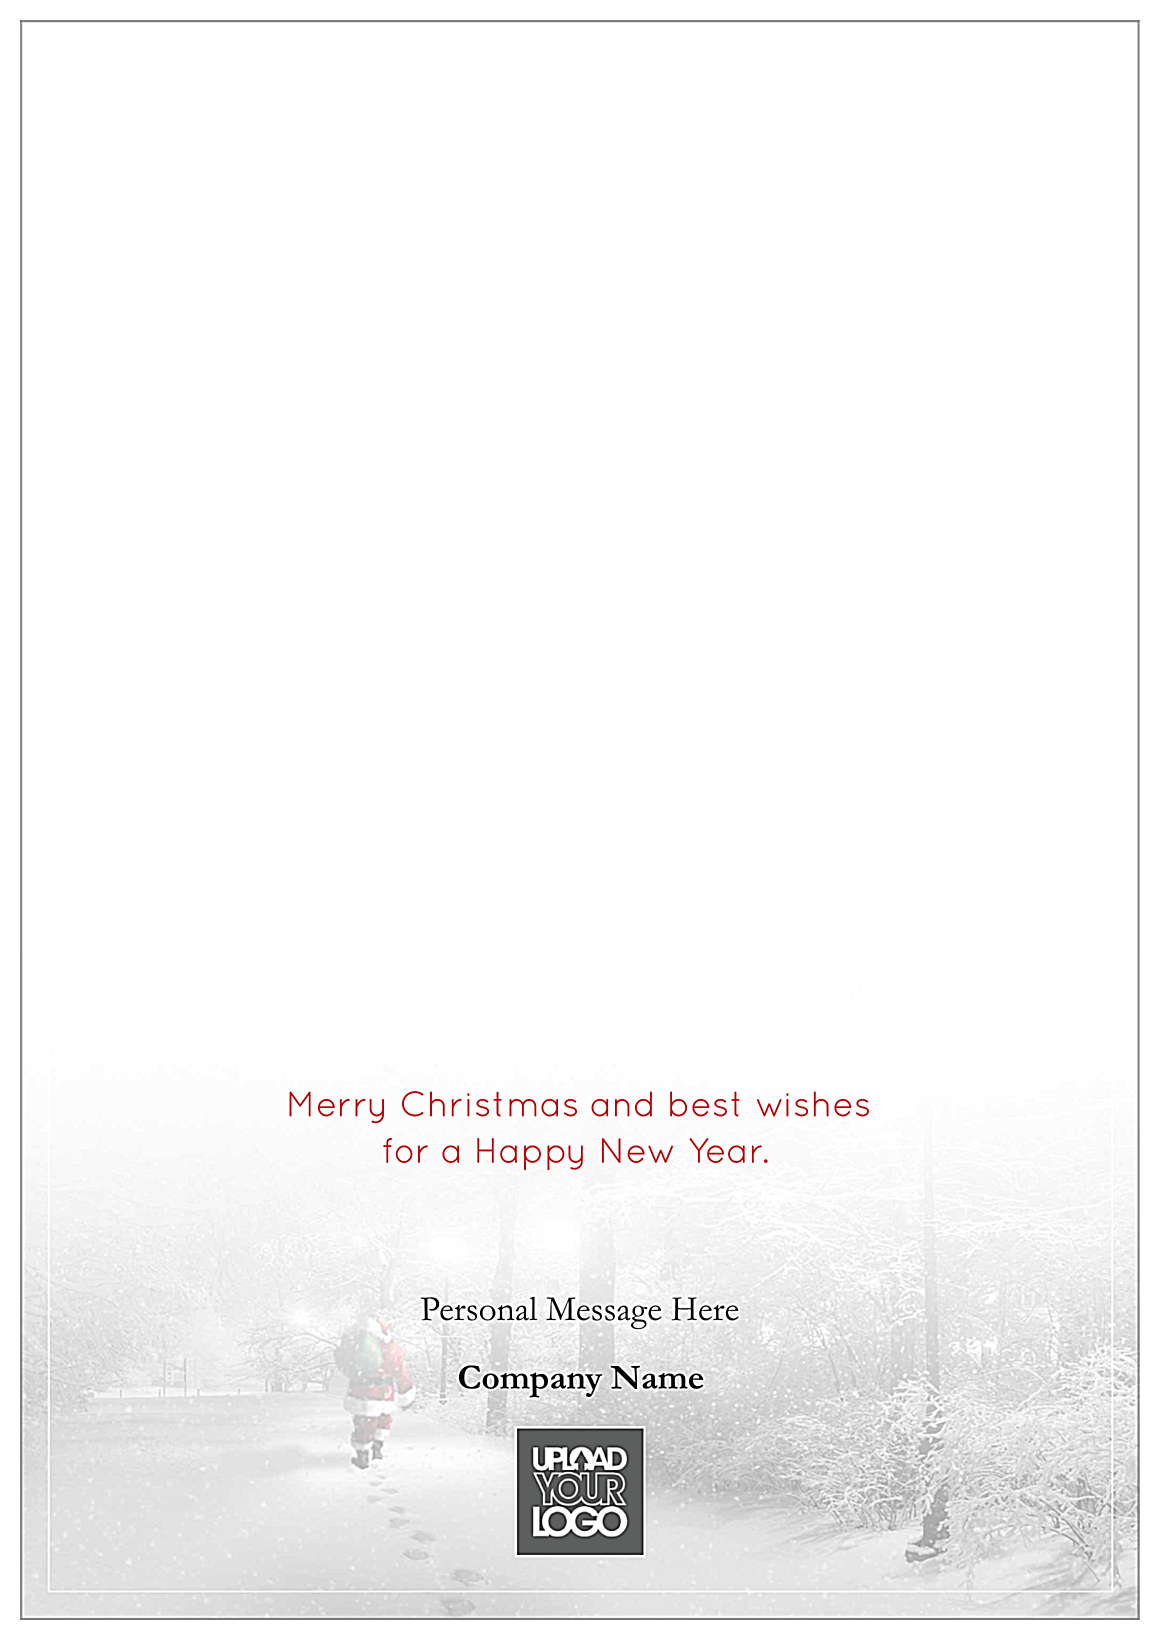 Snowy Merry Christmas back - Greeting Cards Maker